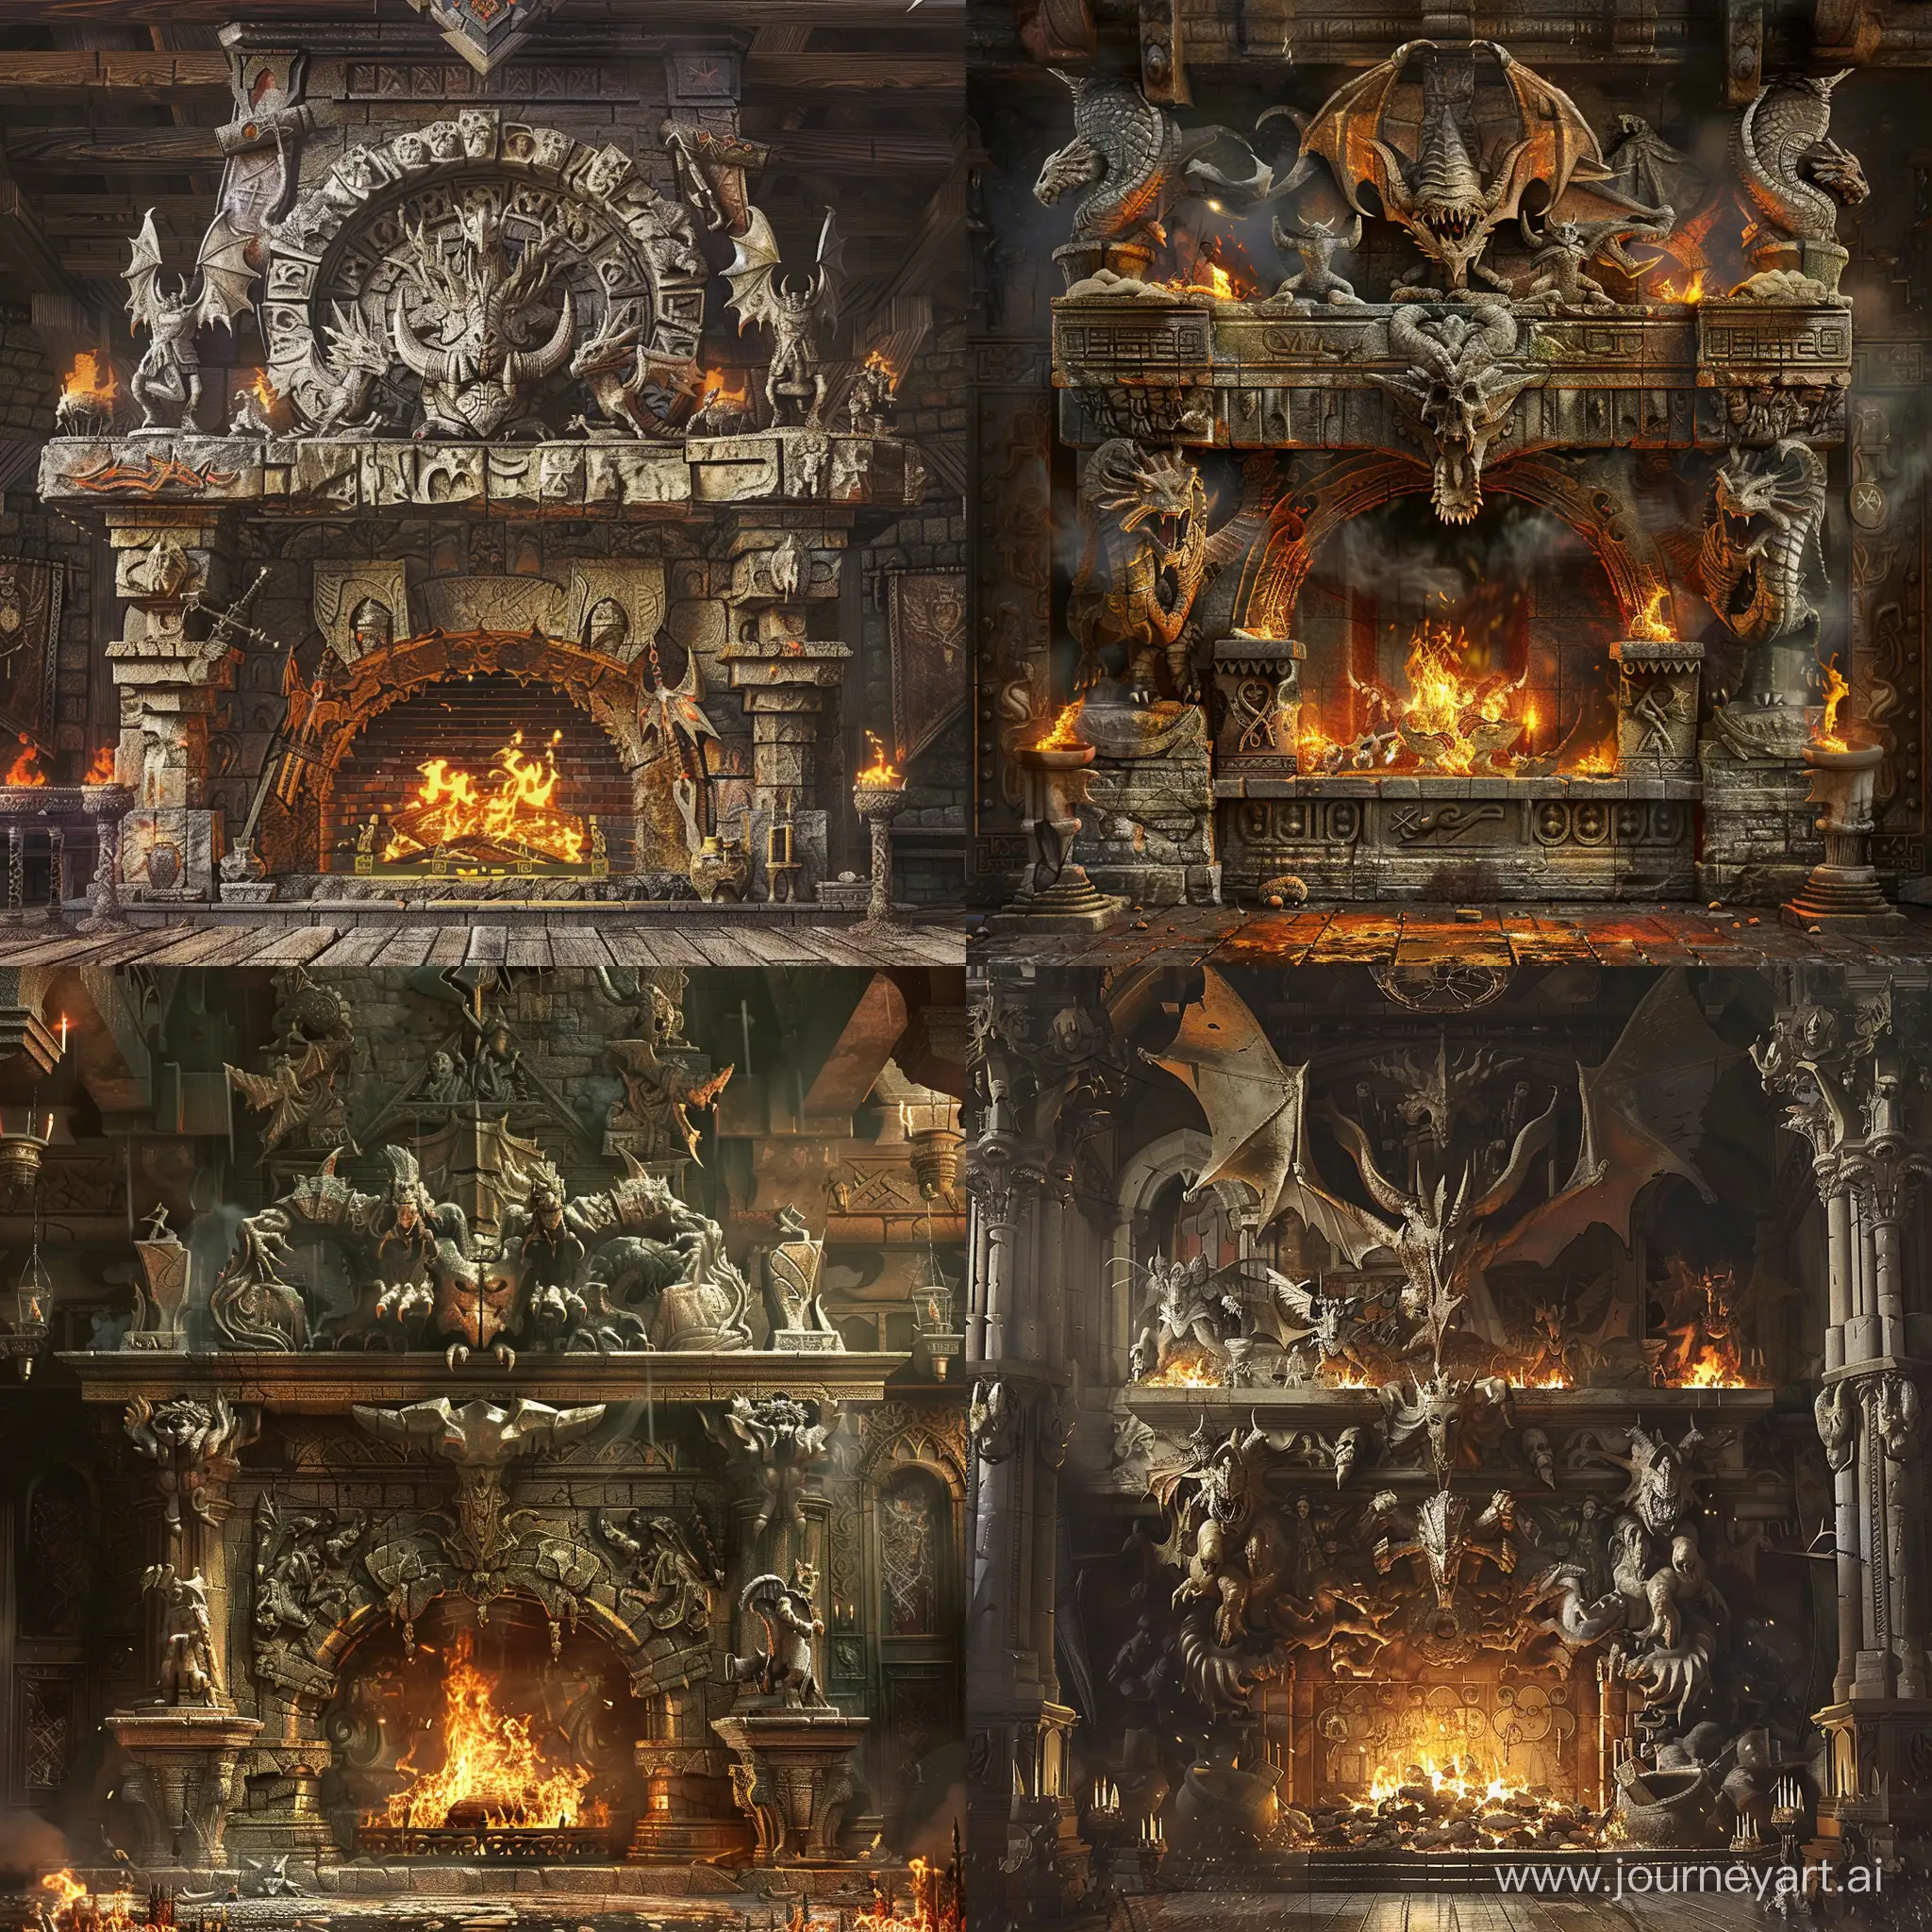 enormous fireplace heavily decorated with sculptures and reliefs of defeated orcs and dragons,  wizard's lair, fantasy concept art, middle ages, concept art